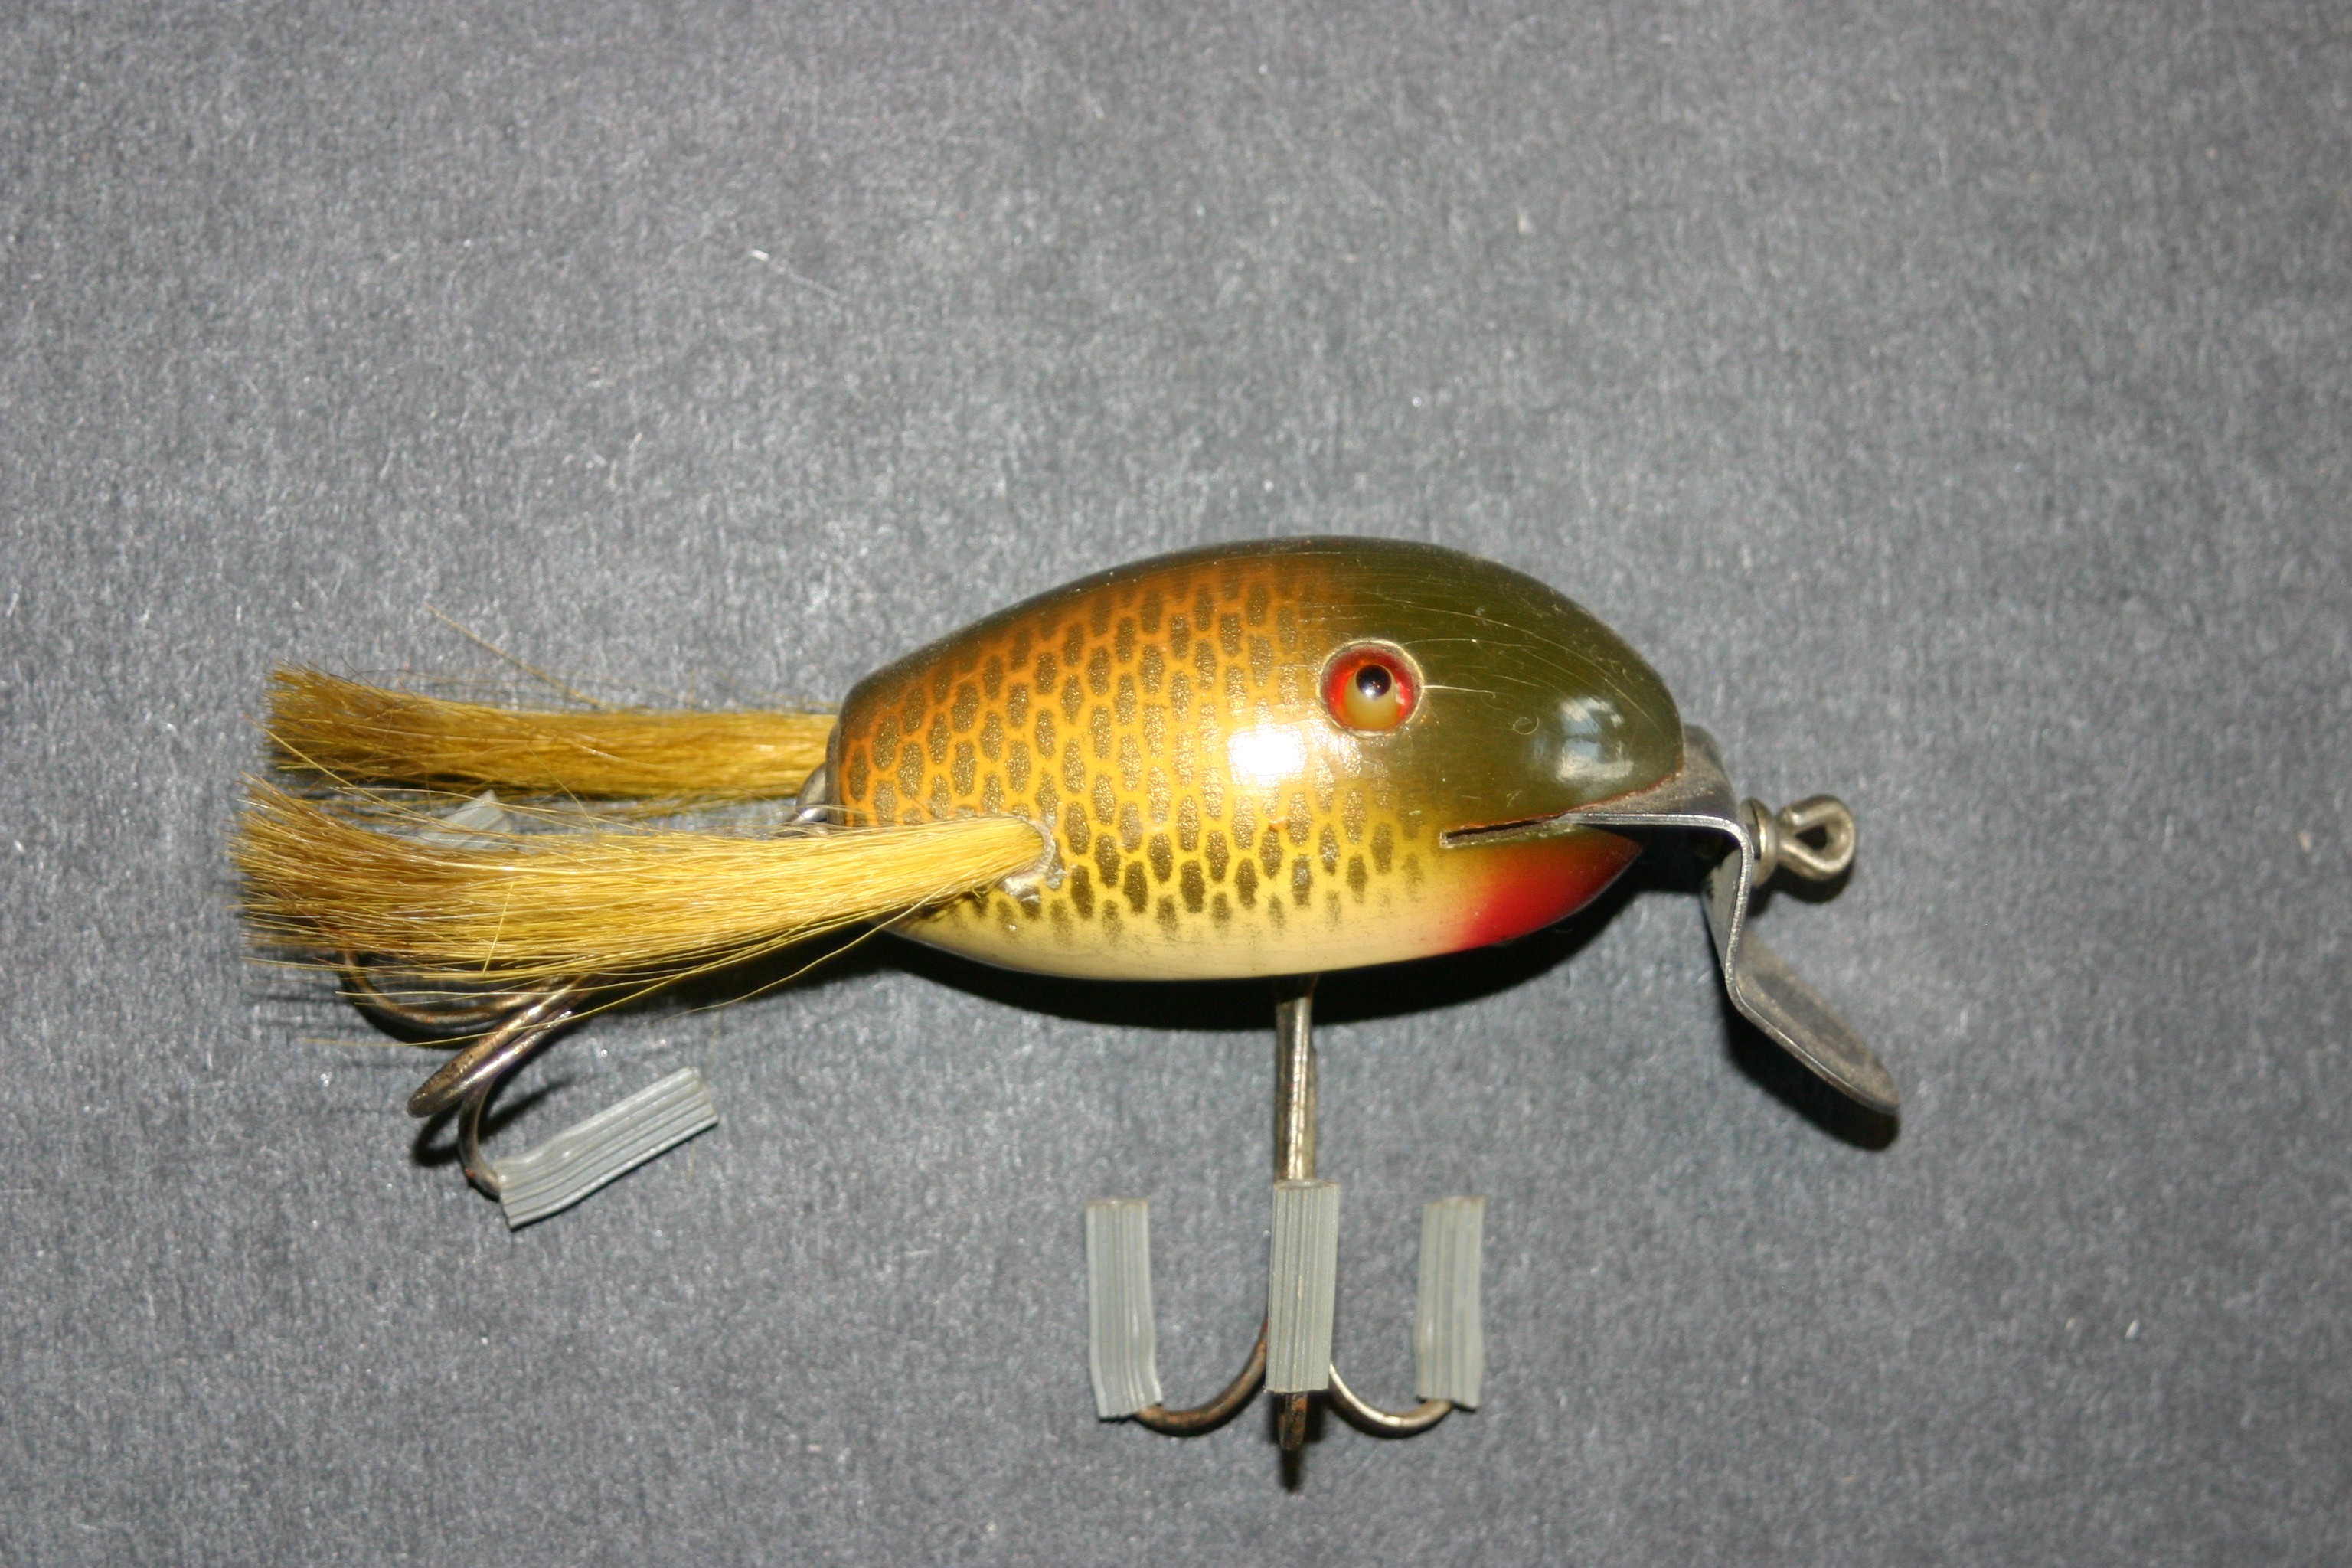 Vintage Lures - 'Deluxe Wag Tail Chub' by Creek Chub Bait Co